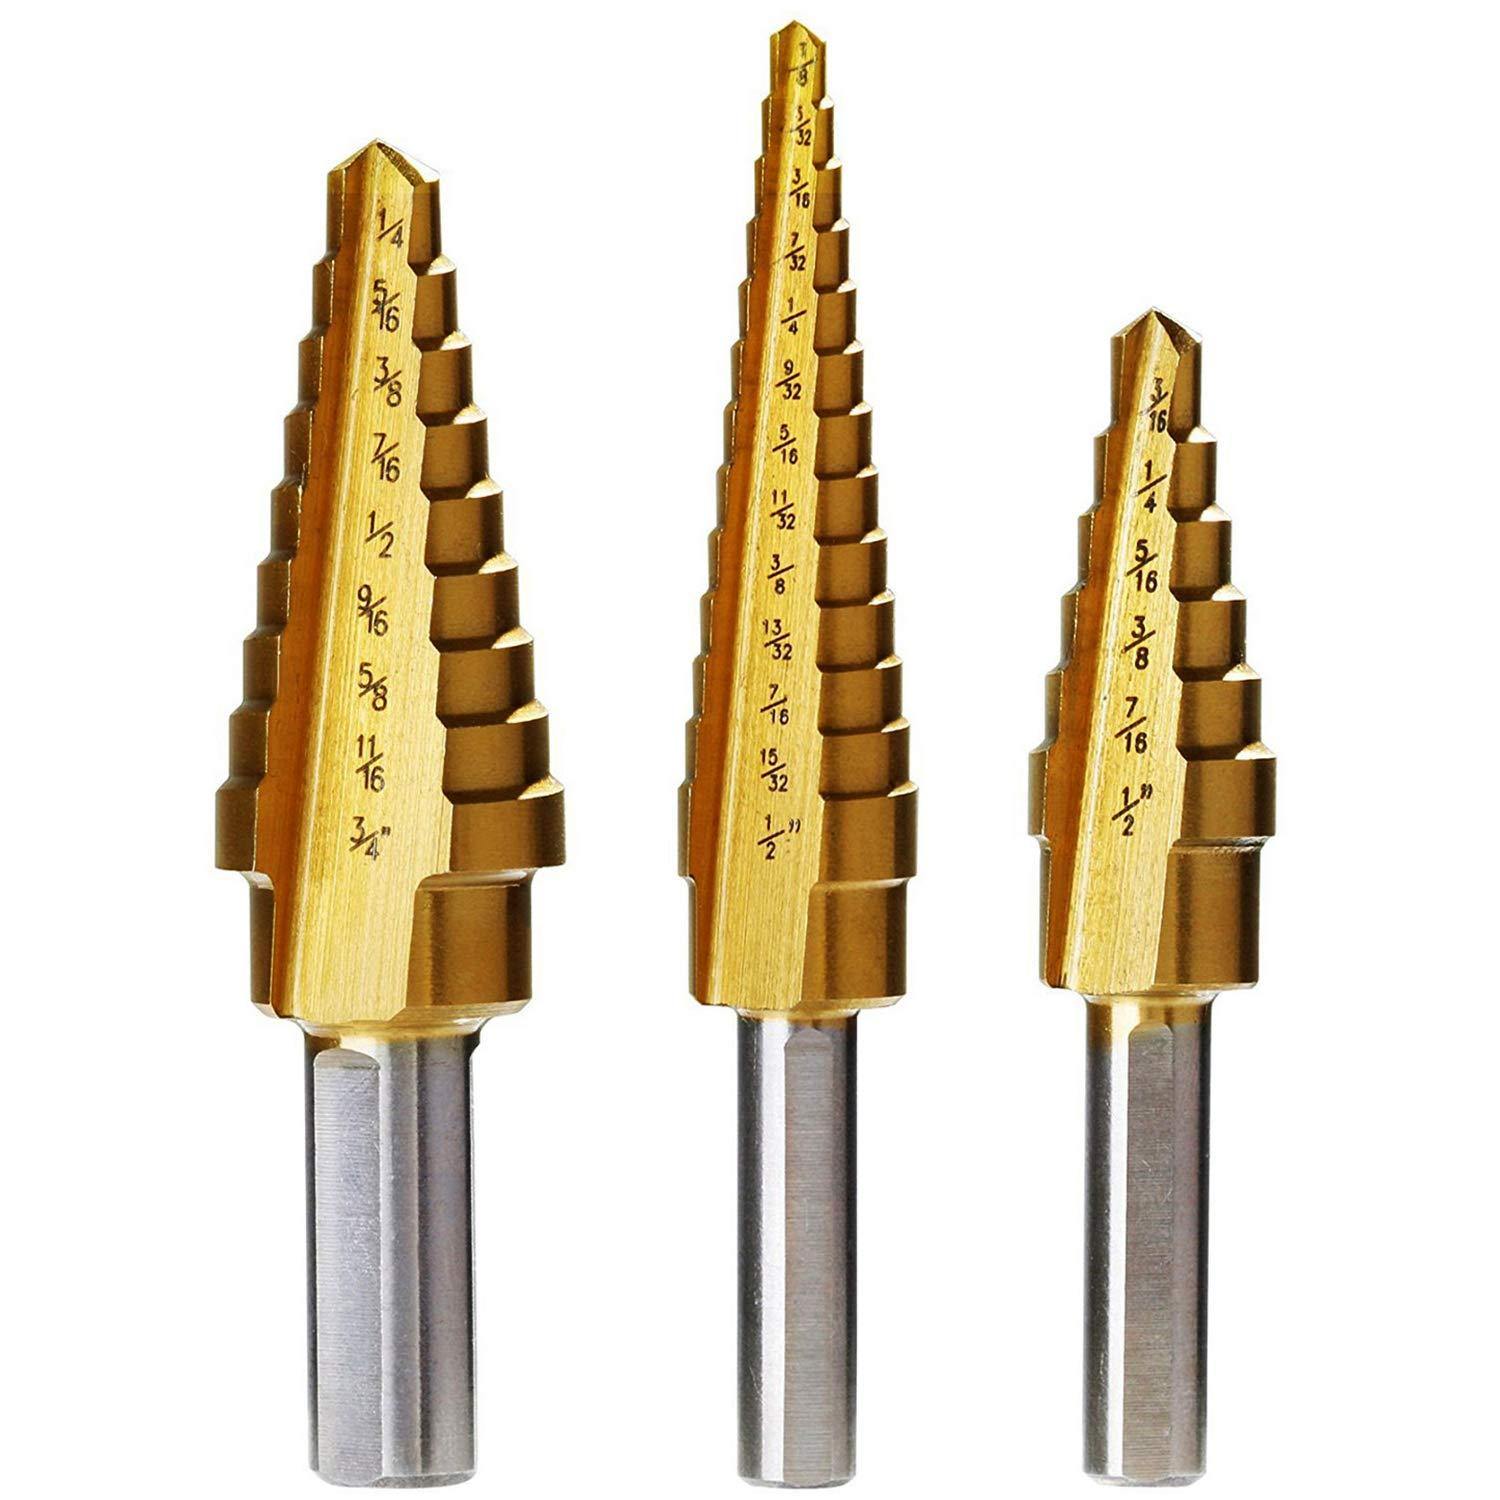 Triangular Handle Step Drill,Knoweasy 3pcs HSS Titanium Coated Step Drill  Bit for Metal/Wood Drilling Hole,28 Sizes of Multiple Hole Stepped Up Bits